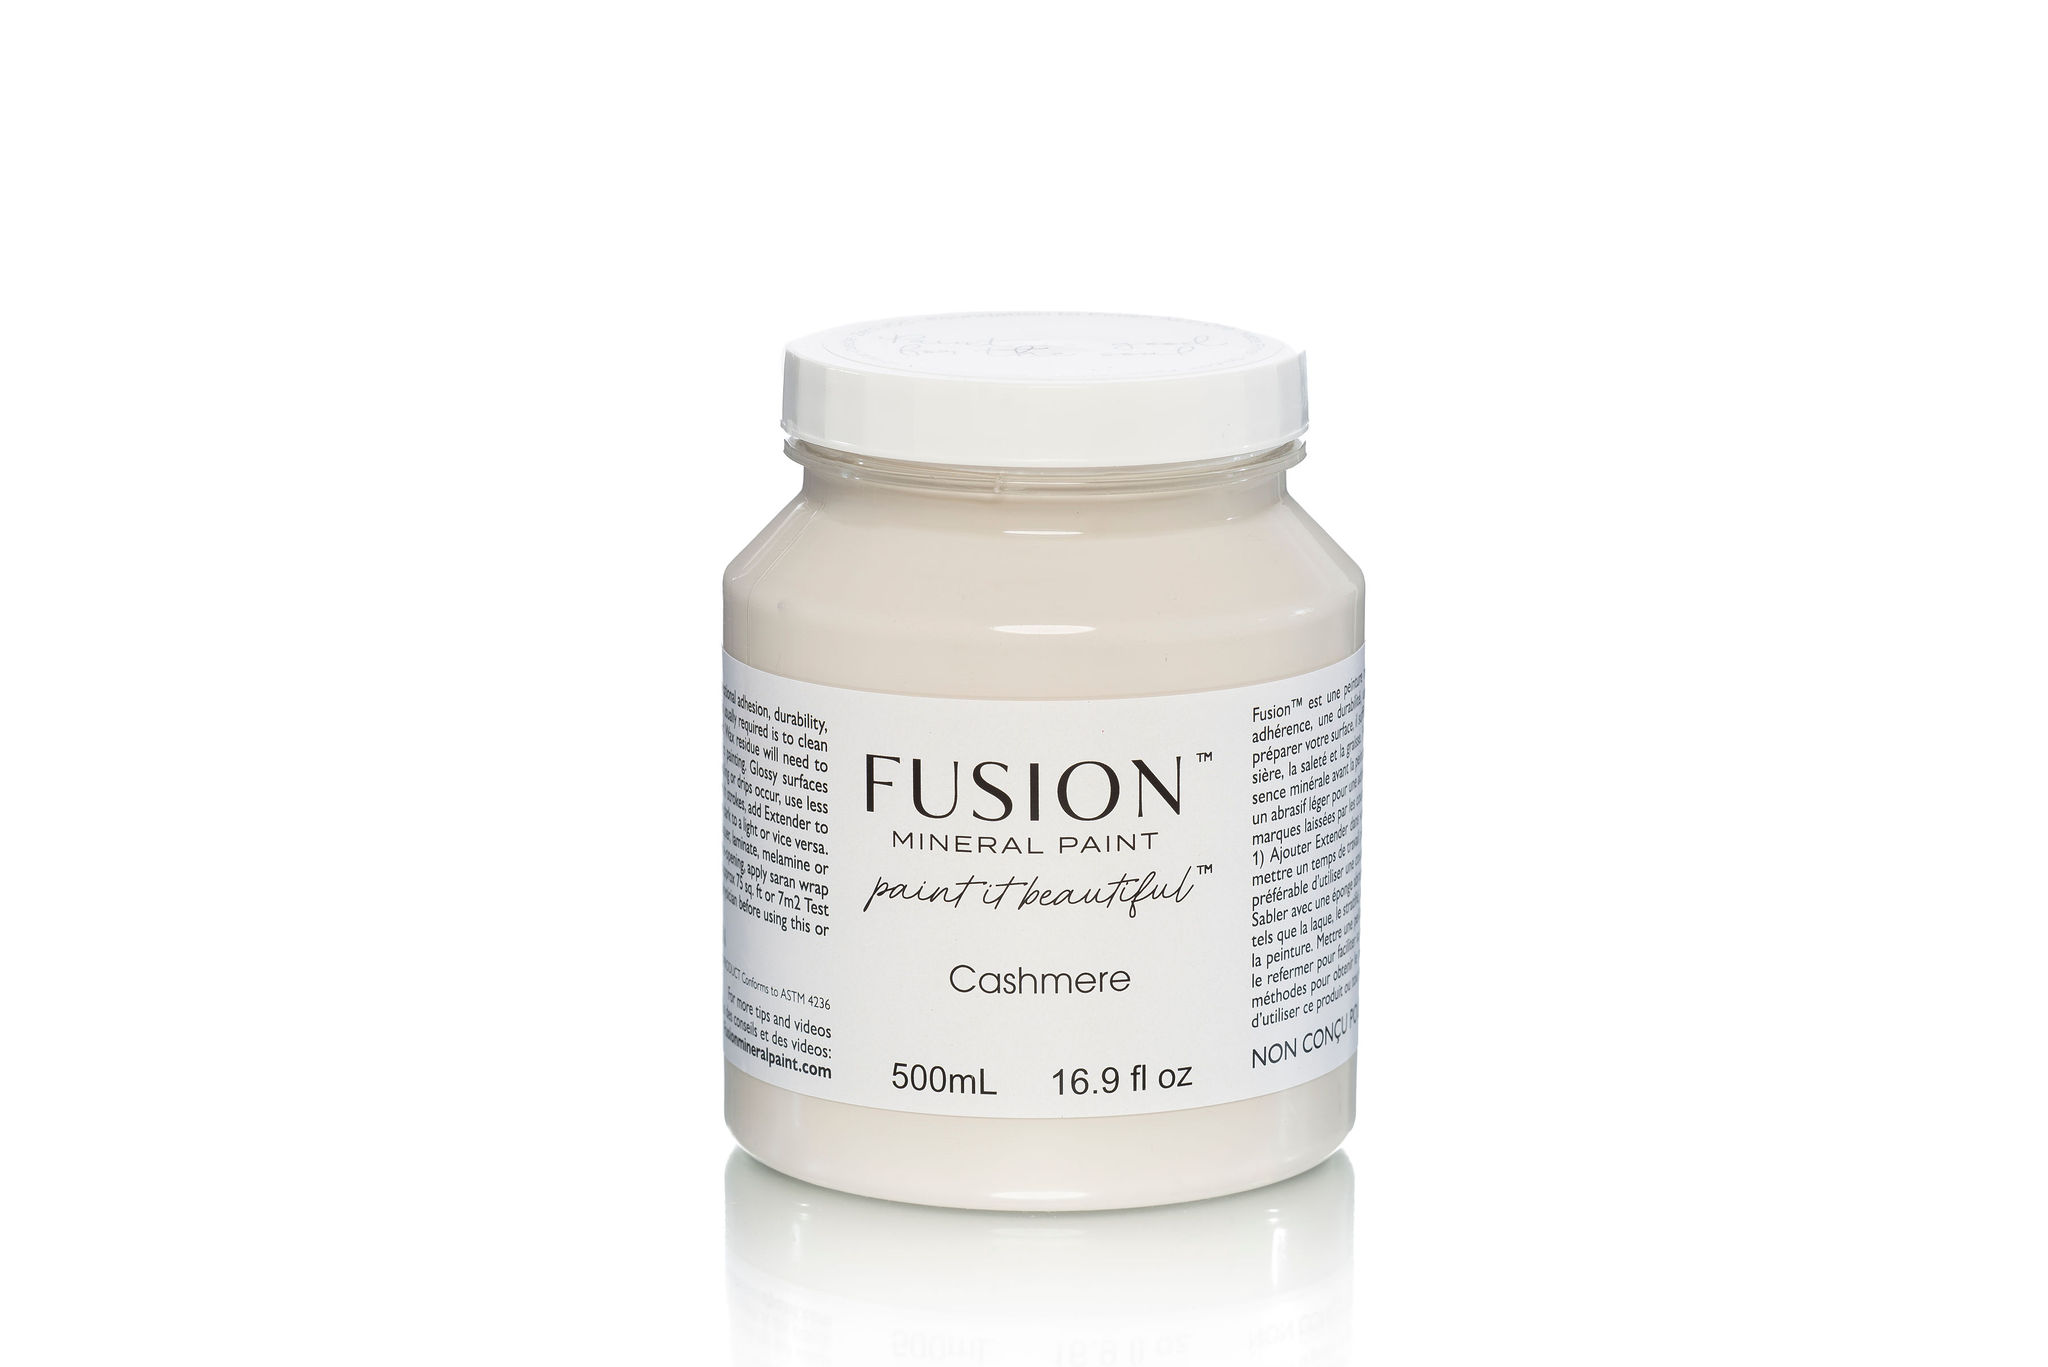 Fusion Mineral Paint vernice ecologica color avorio